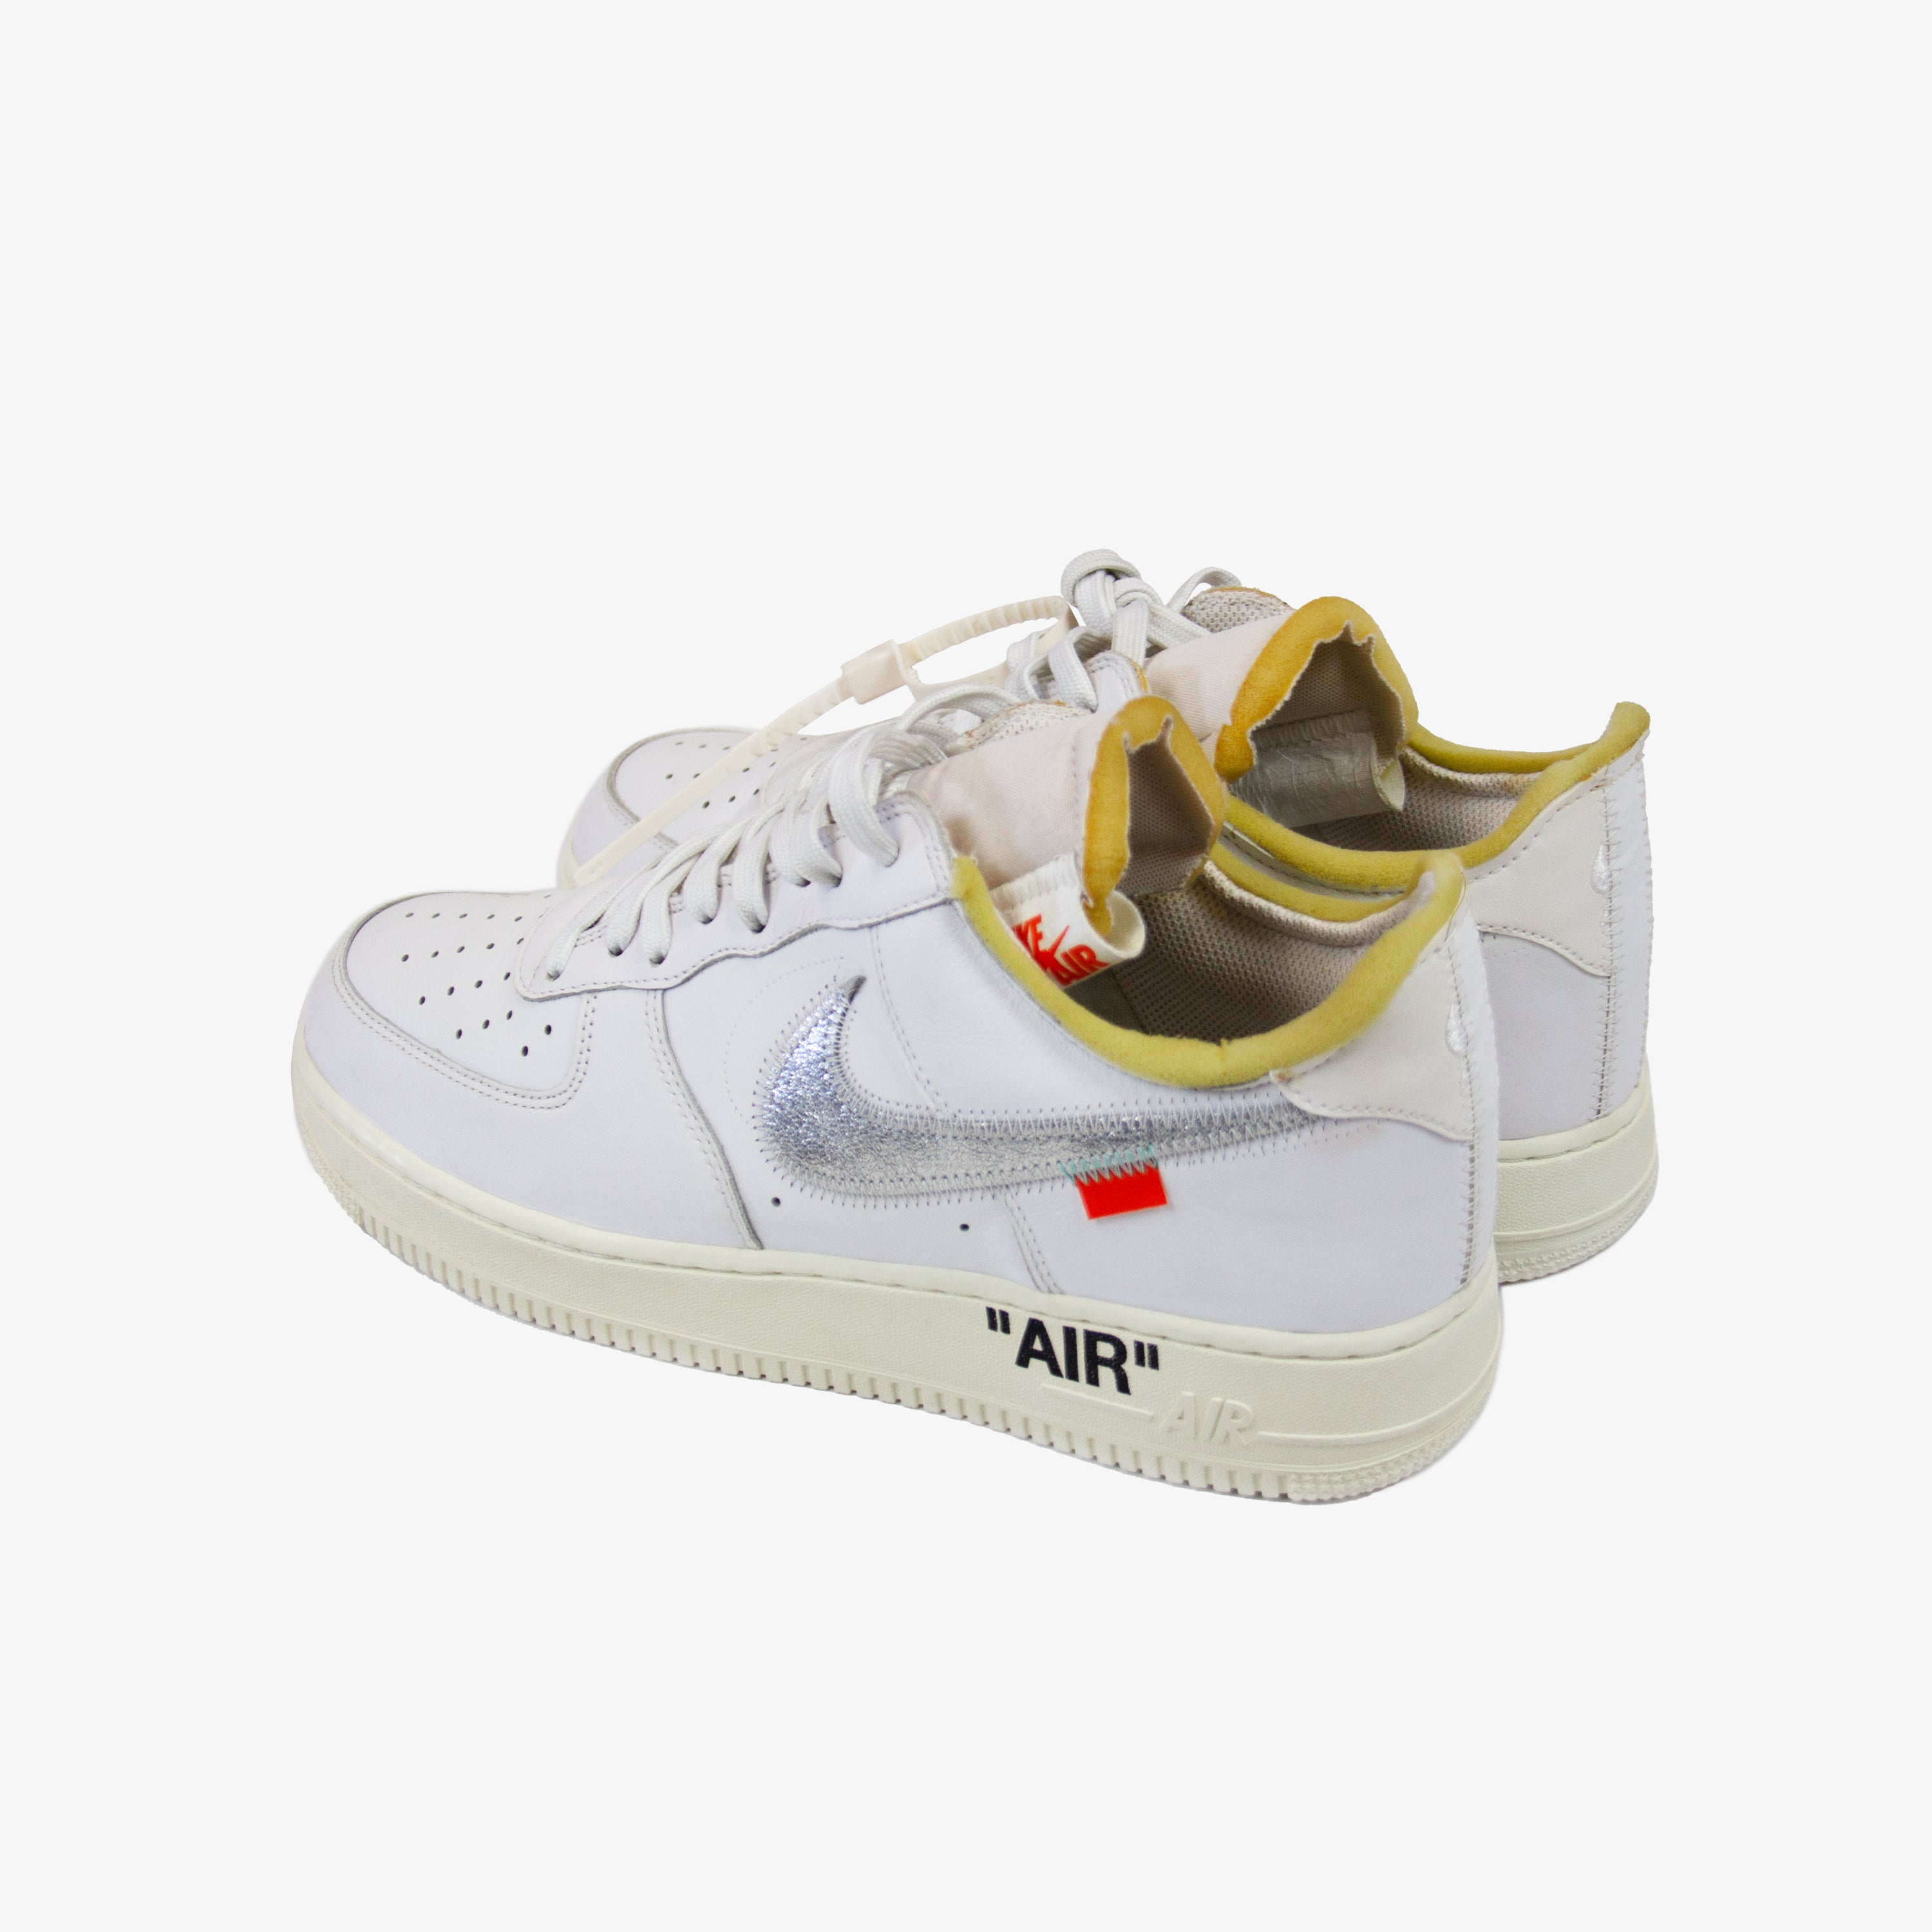 Nike OFF-WHITE x Air Force 1 'ComplexCon Exclusive' - AO4297 100